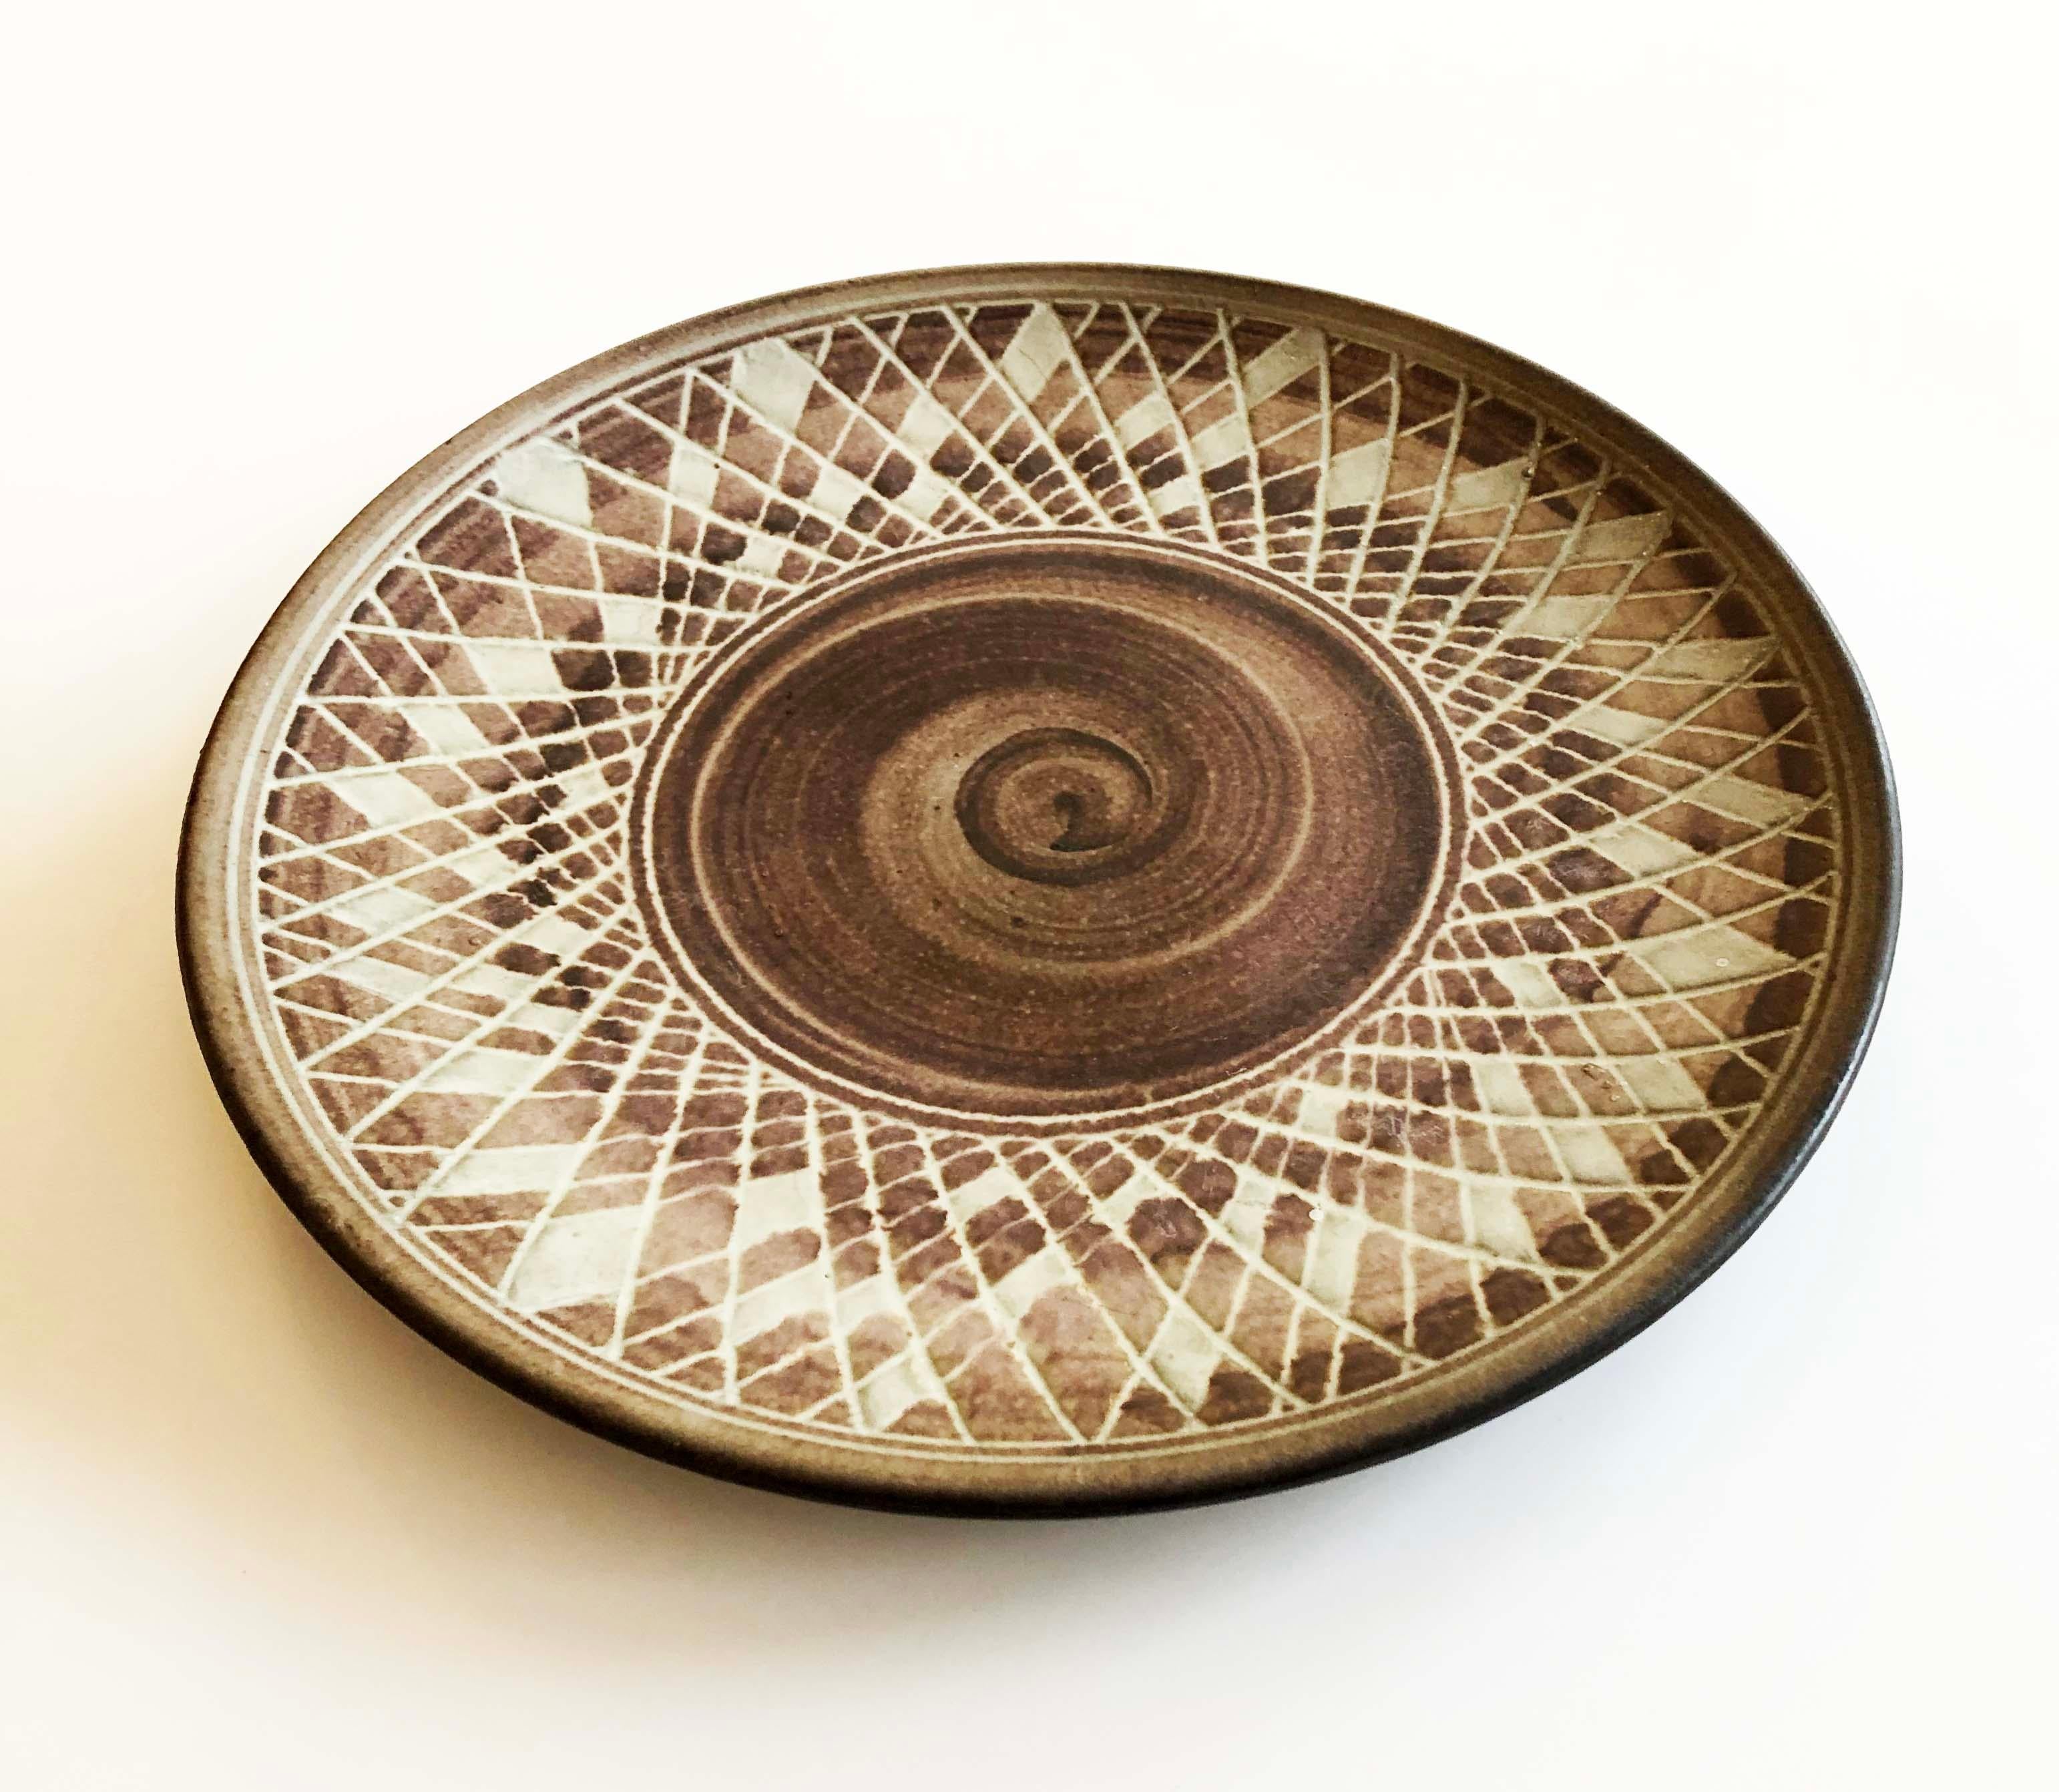 A spectacular hand-thrown earthenware ceramic platter with spiral motif and incised web overlay by Vermont studio potter Nancy Wickham Boyd. 

Earth tones. Signed.